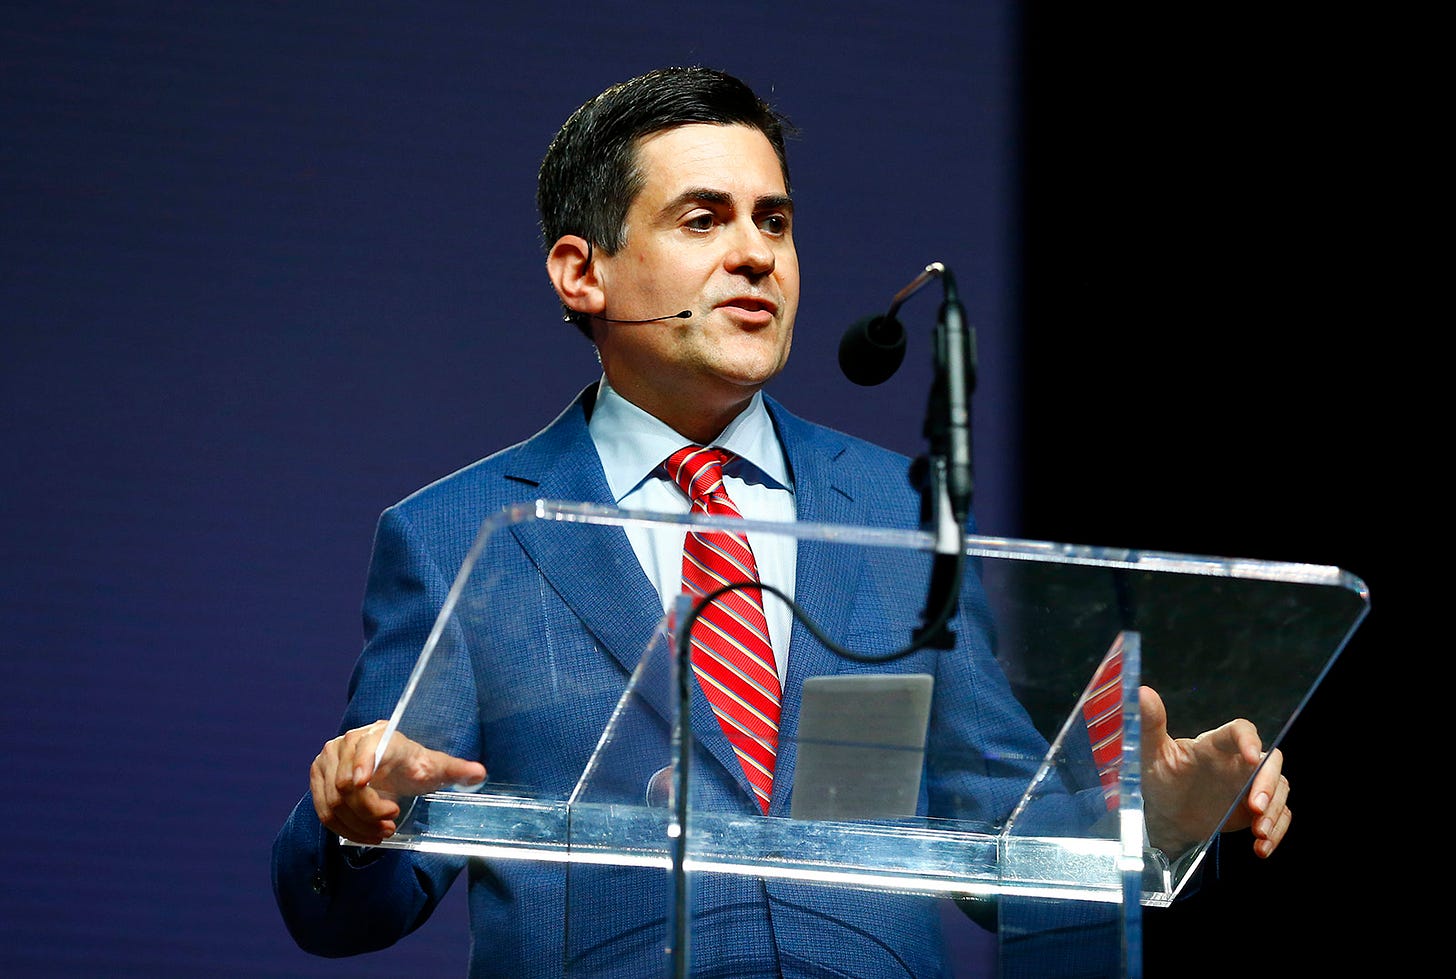 Russell Moore to ERLC trustees: 'They want me to live in psychological  terror'